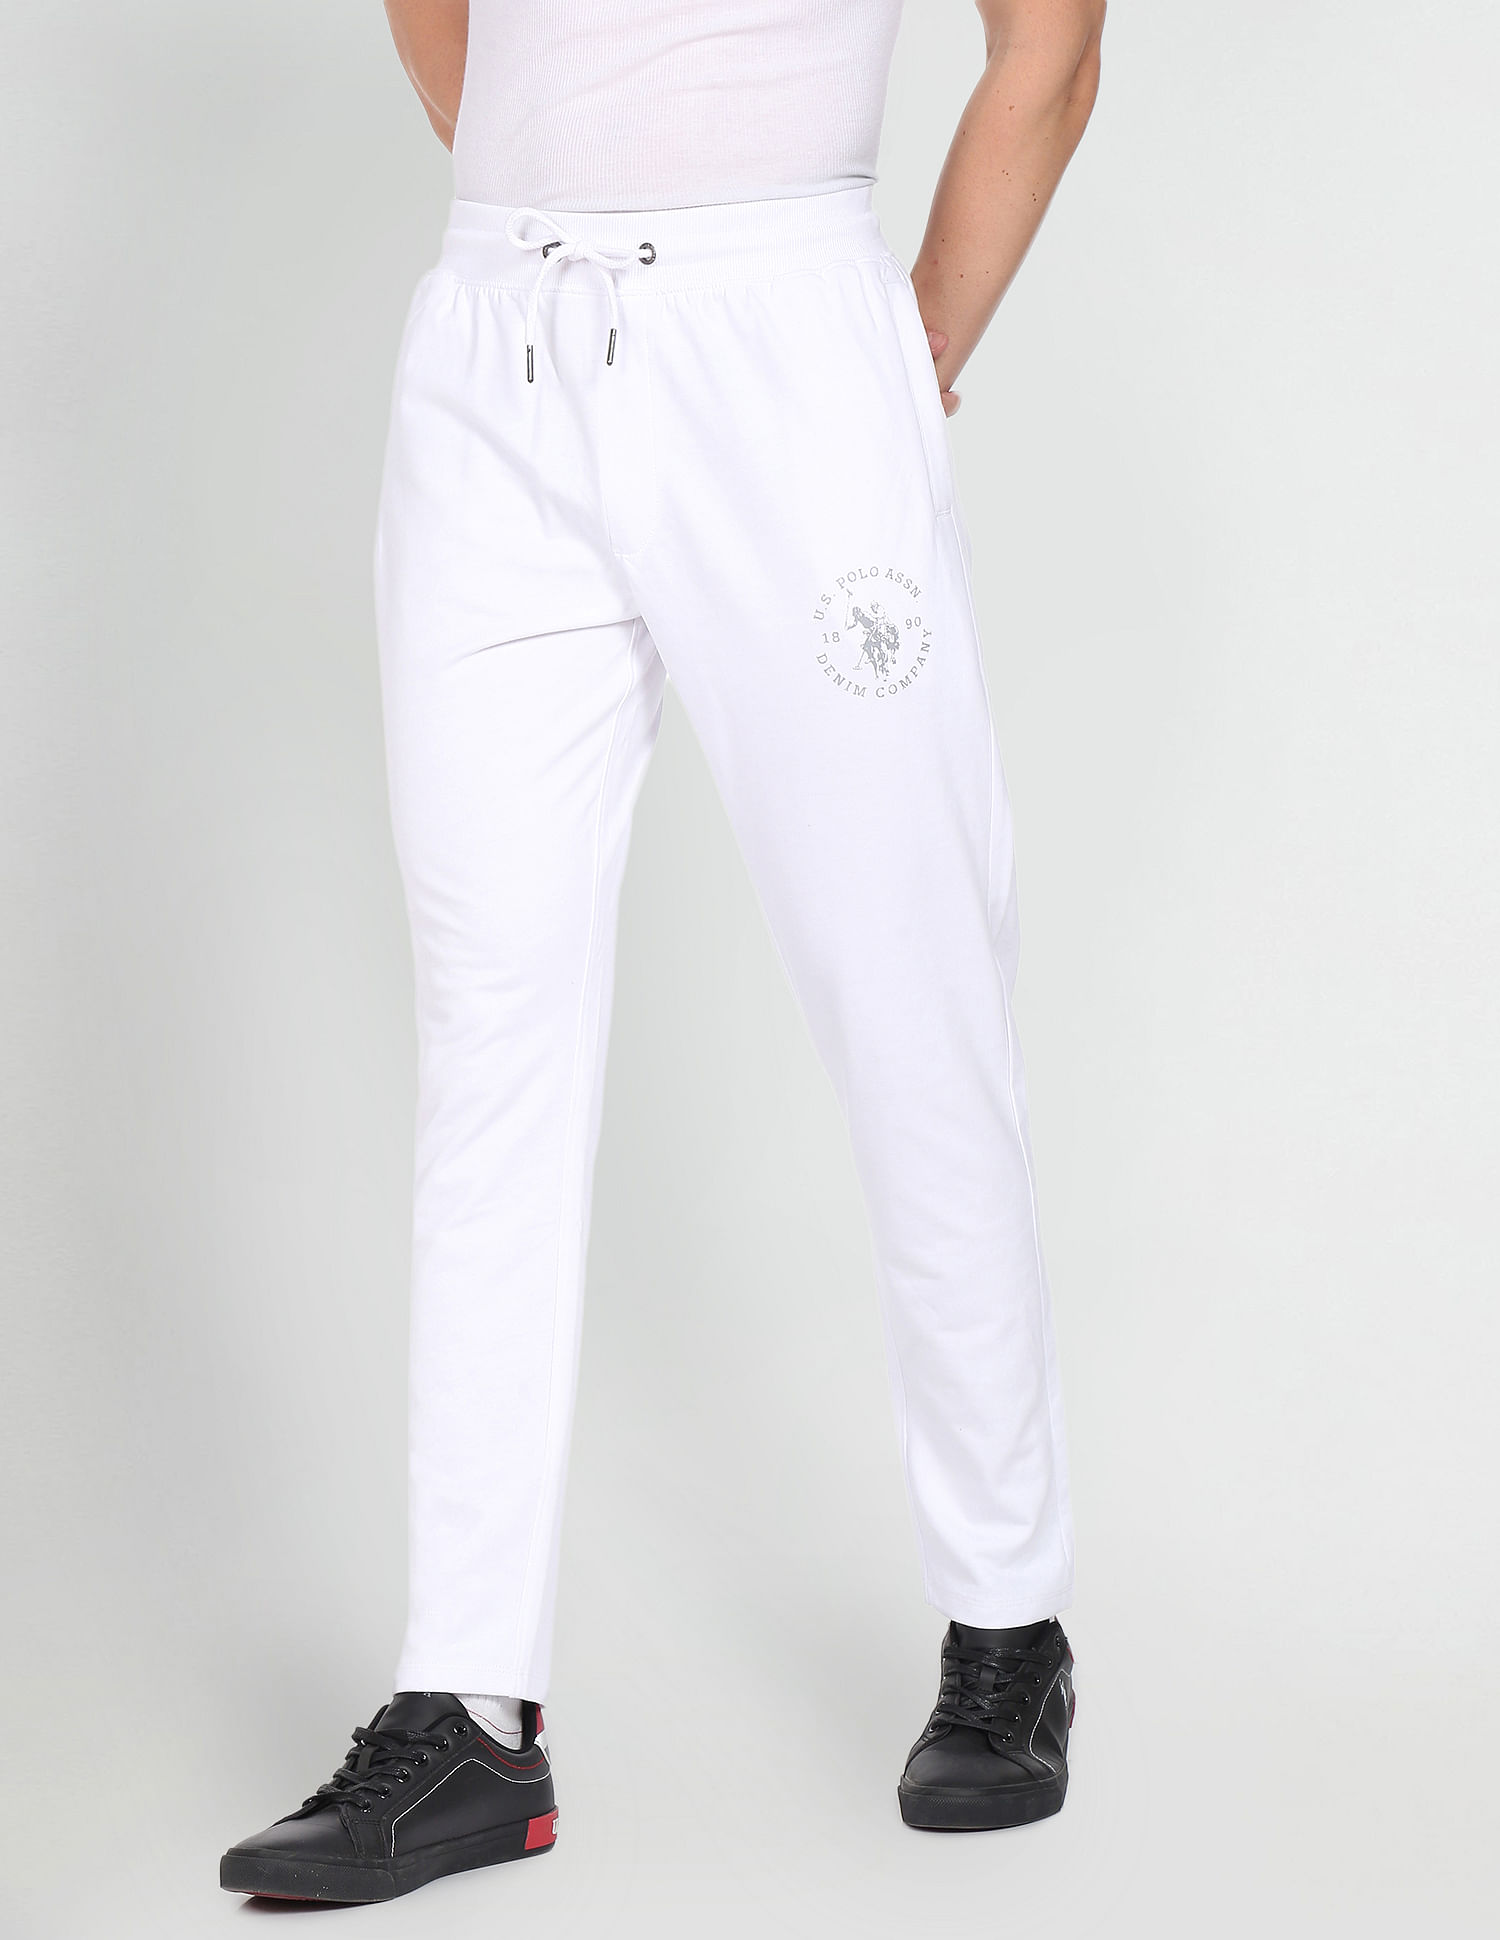 U.S. POLO ASSN. Mid Rise Textured Track Pants White 